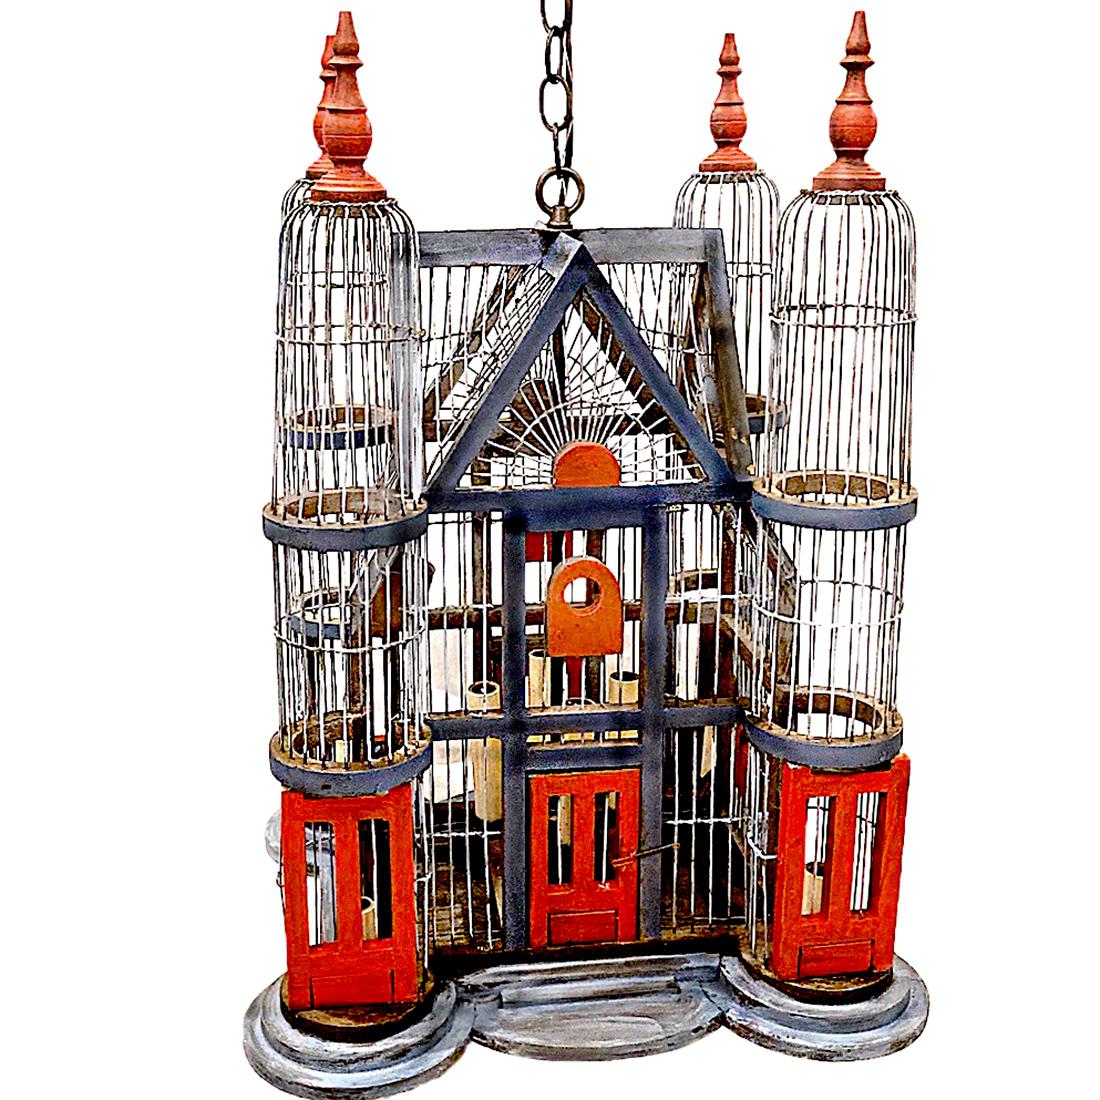 A circa 1950's French birdcage chandelier with eight interior lights.

Measurements:
Current drop: 31